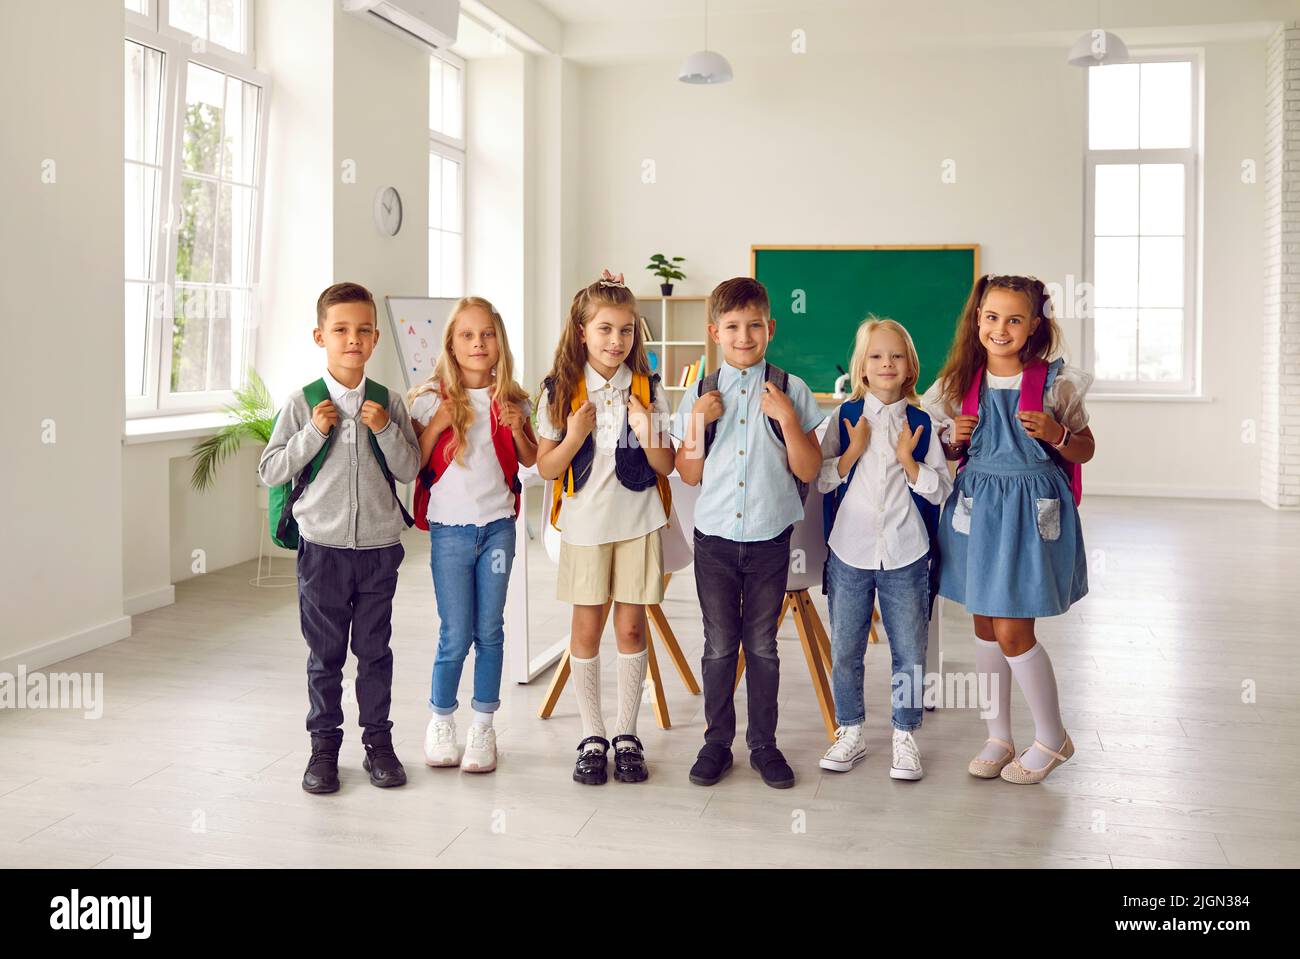 Portrait of small smiling group of first graders in modern elementary school classroom. Stock Photo